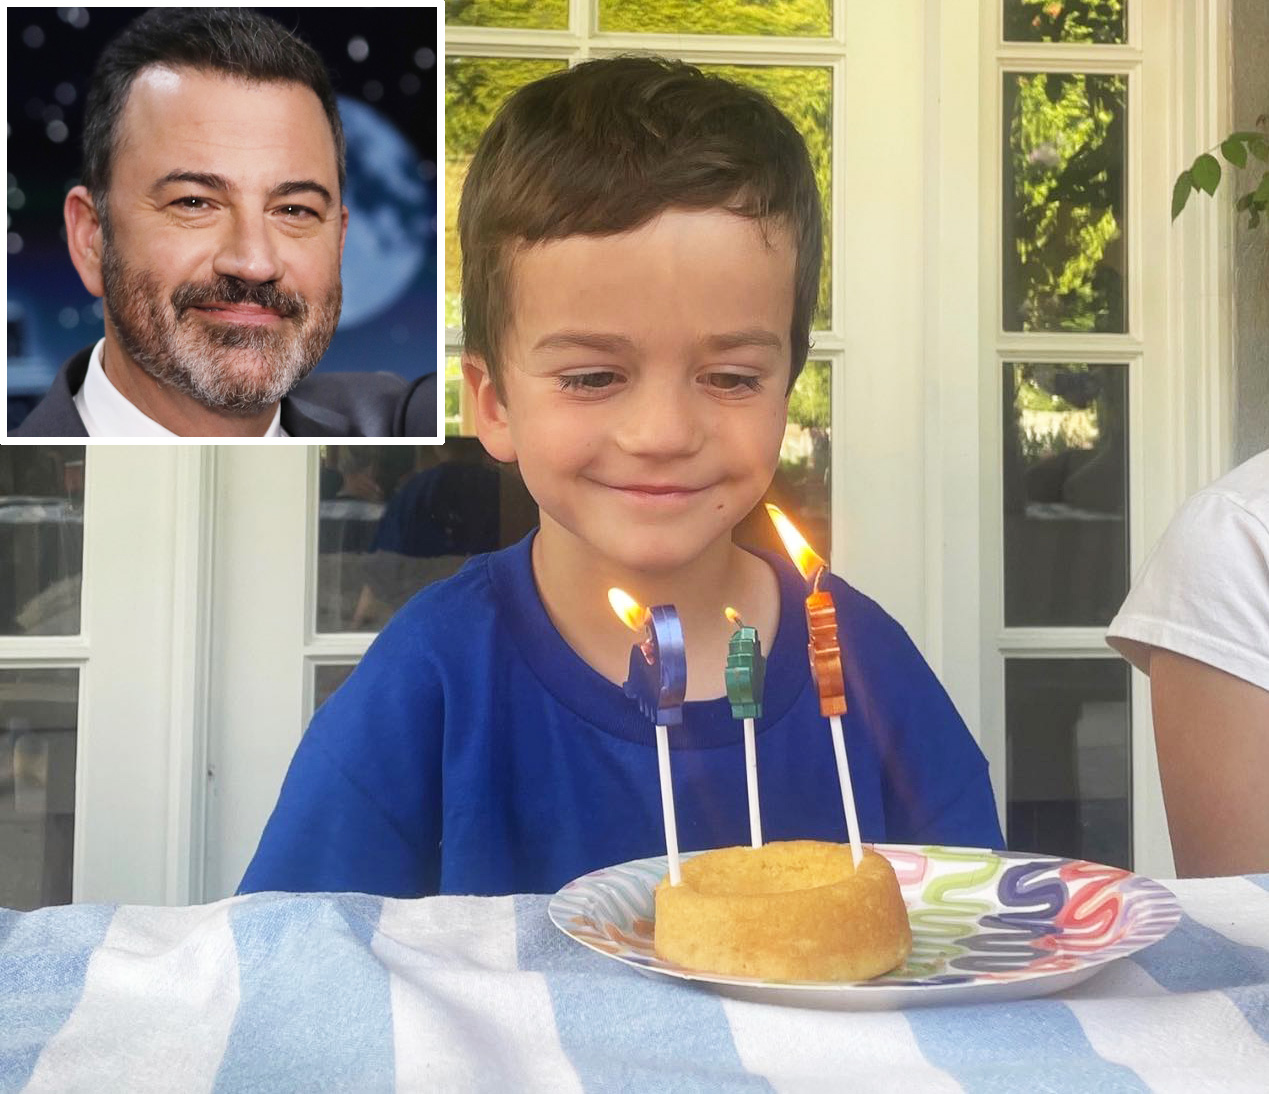 Jimmy Kimmel Celebrates Son Billy's 5th Birthday, Says He's 'Grateful' for Doctors Who Saved Him